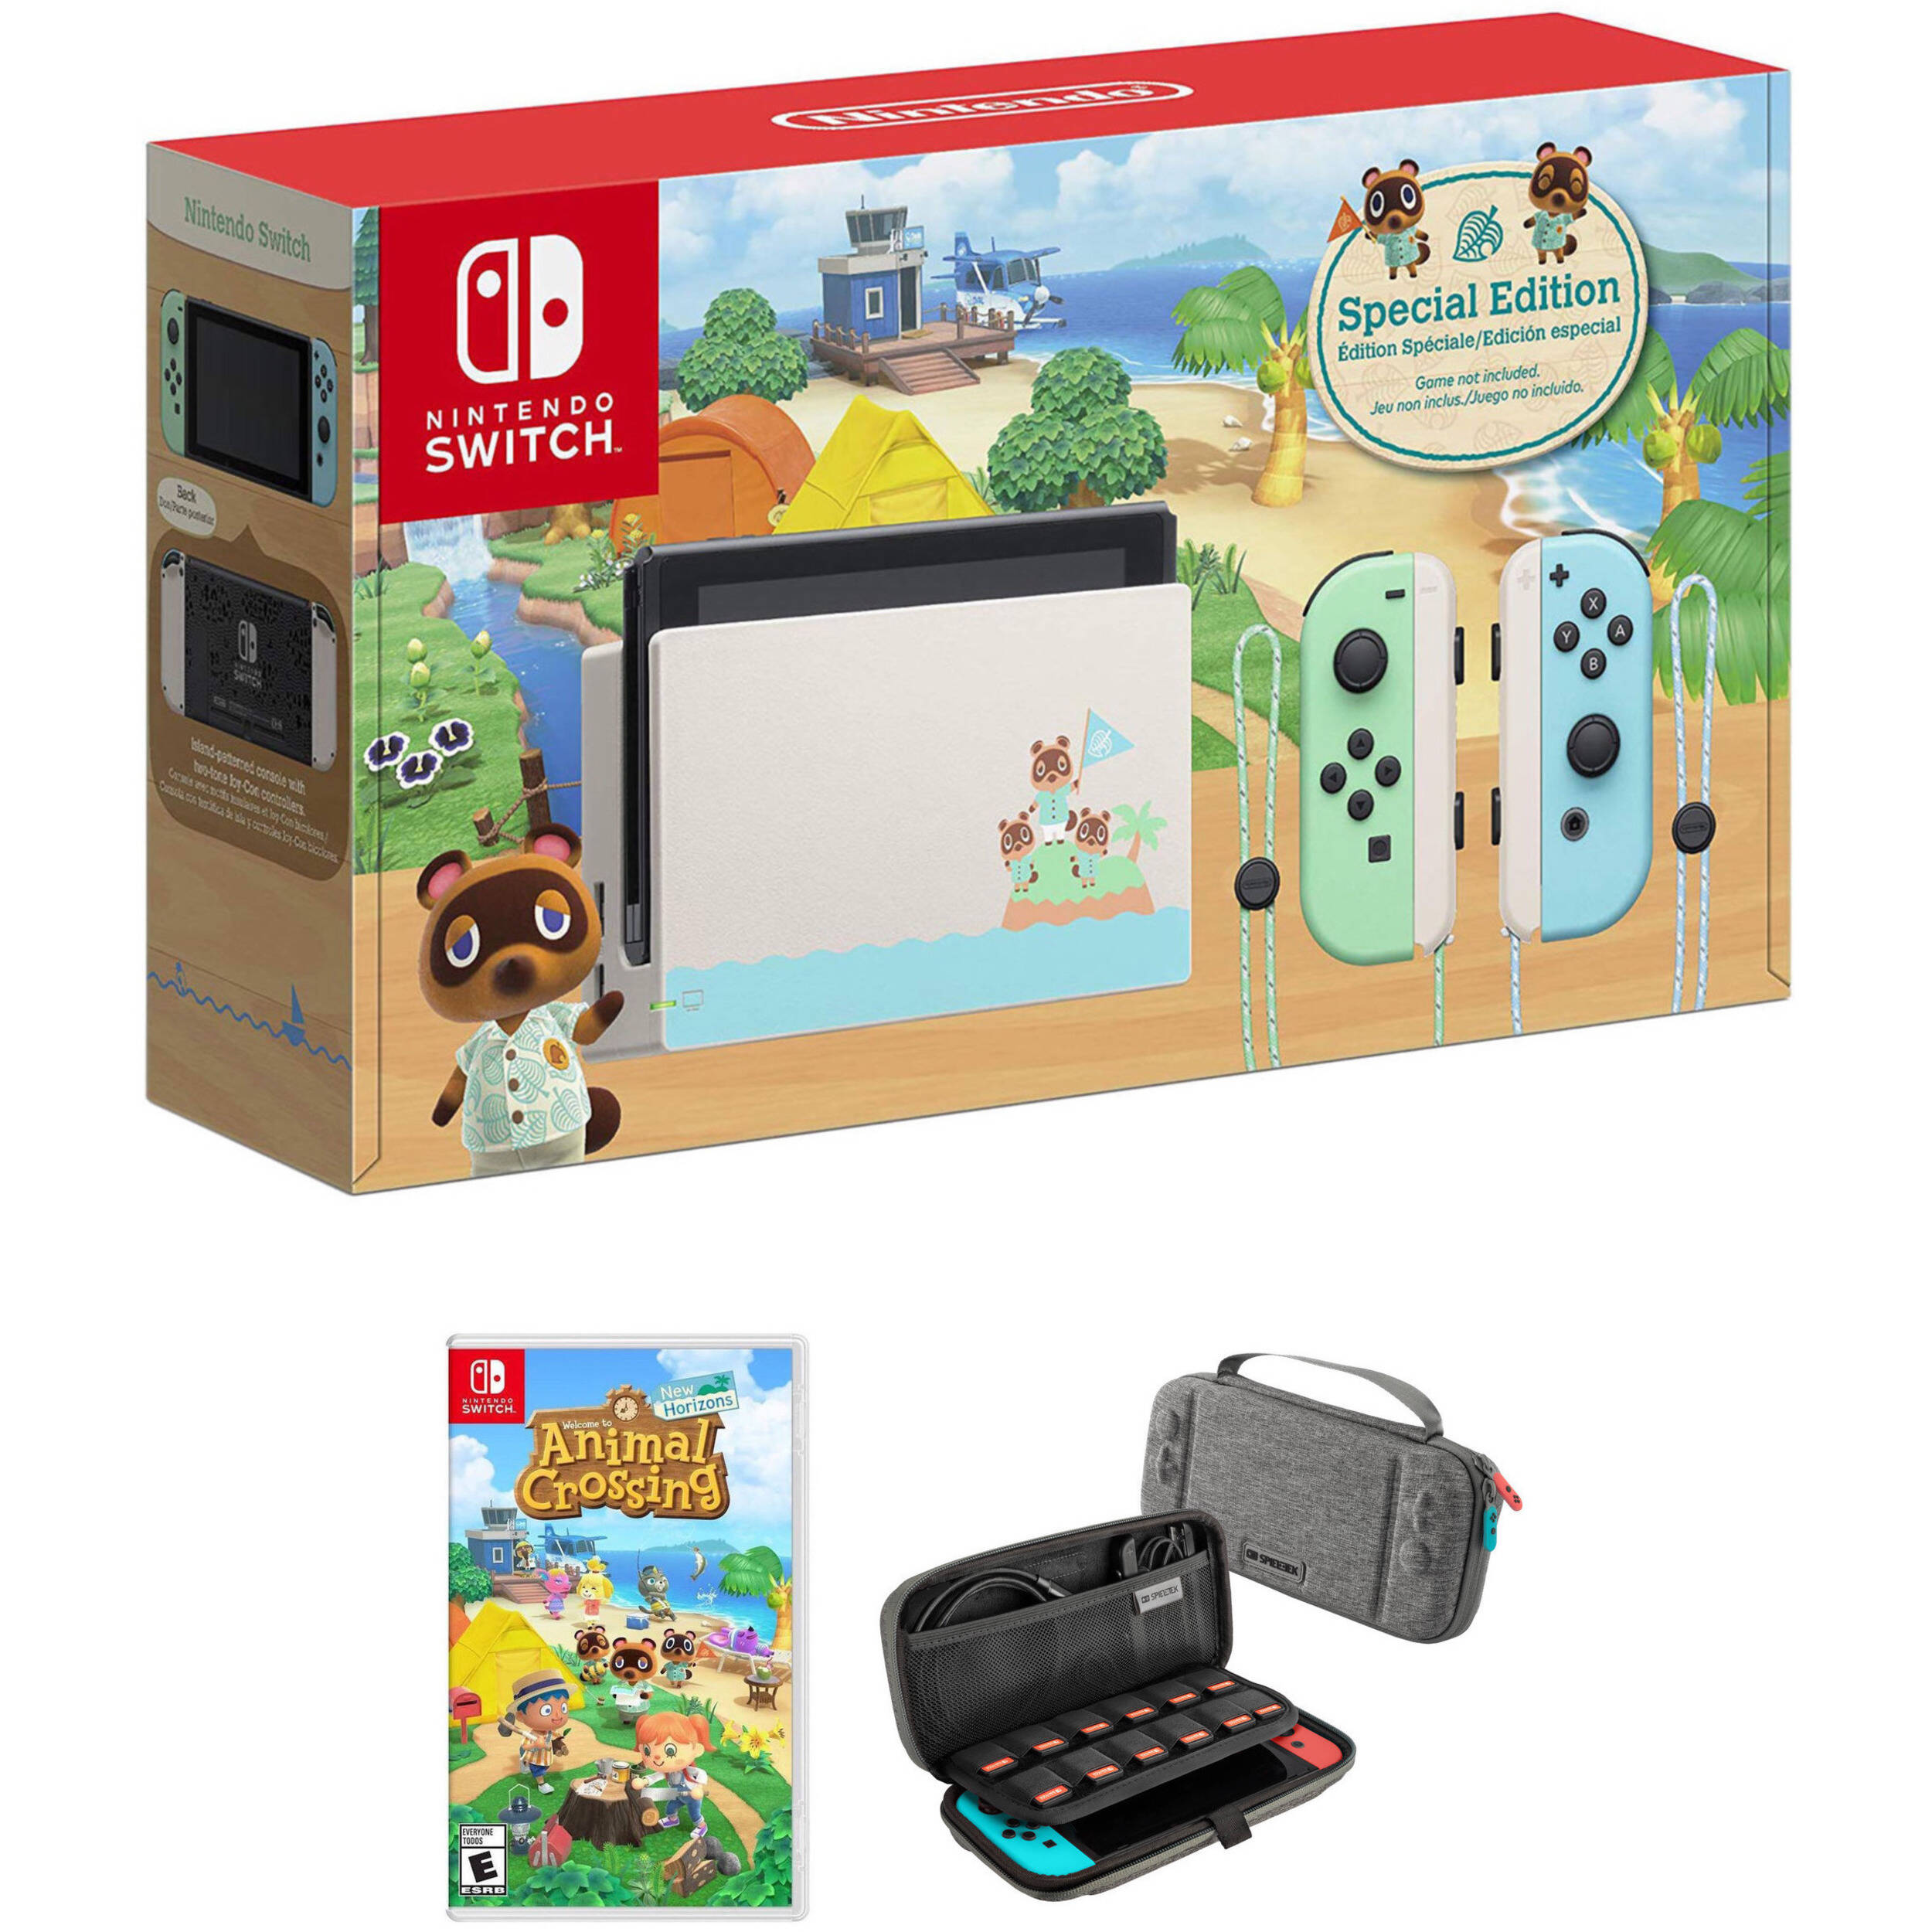 will there be a special edition animal crossing switch